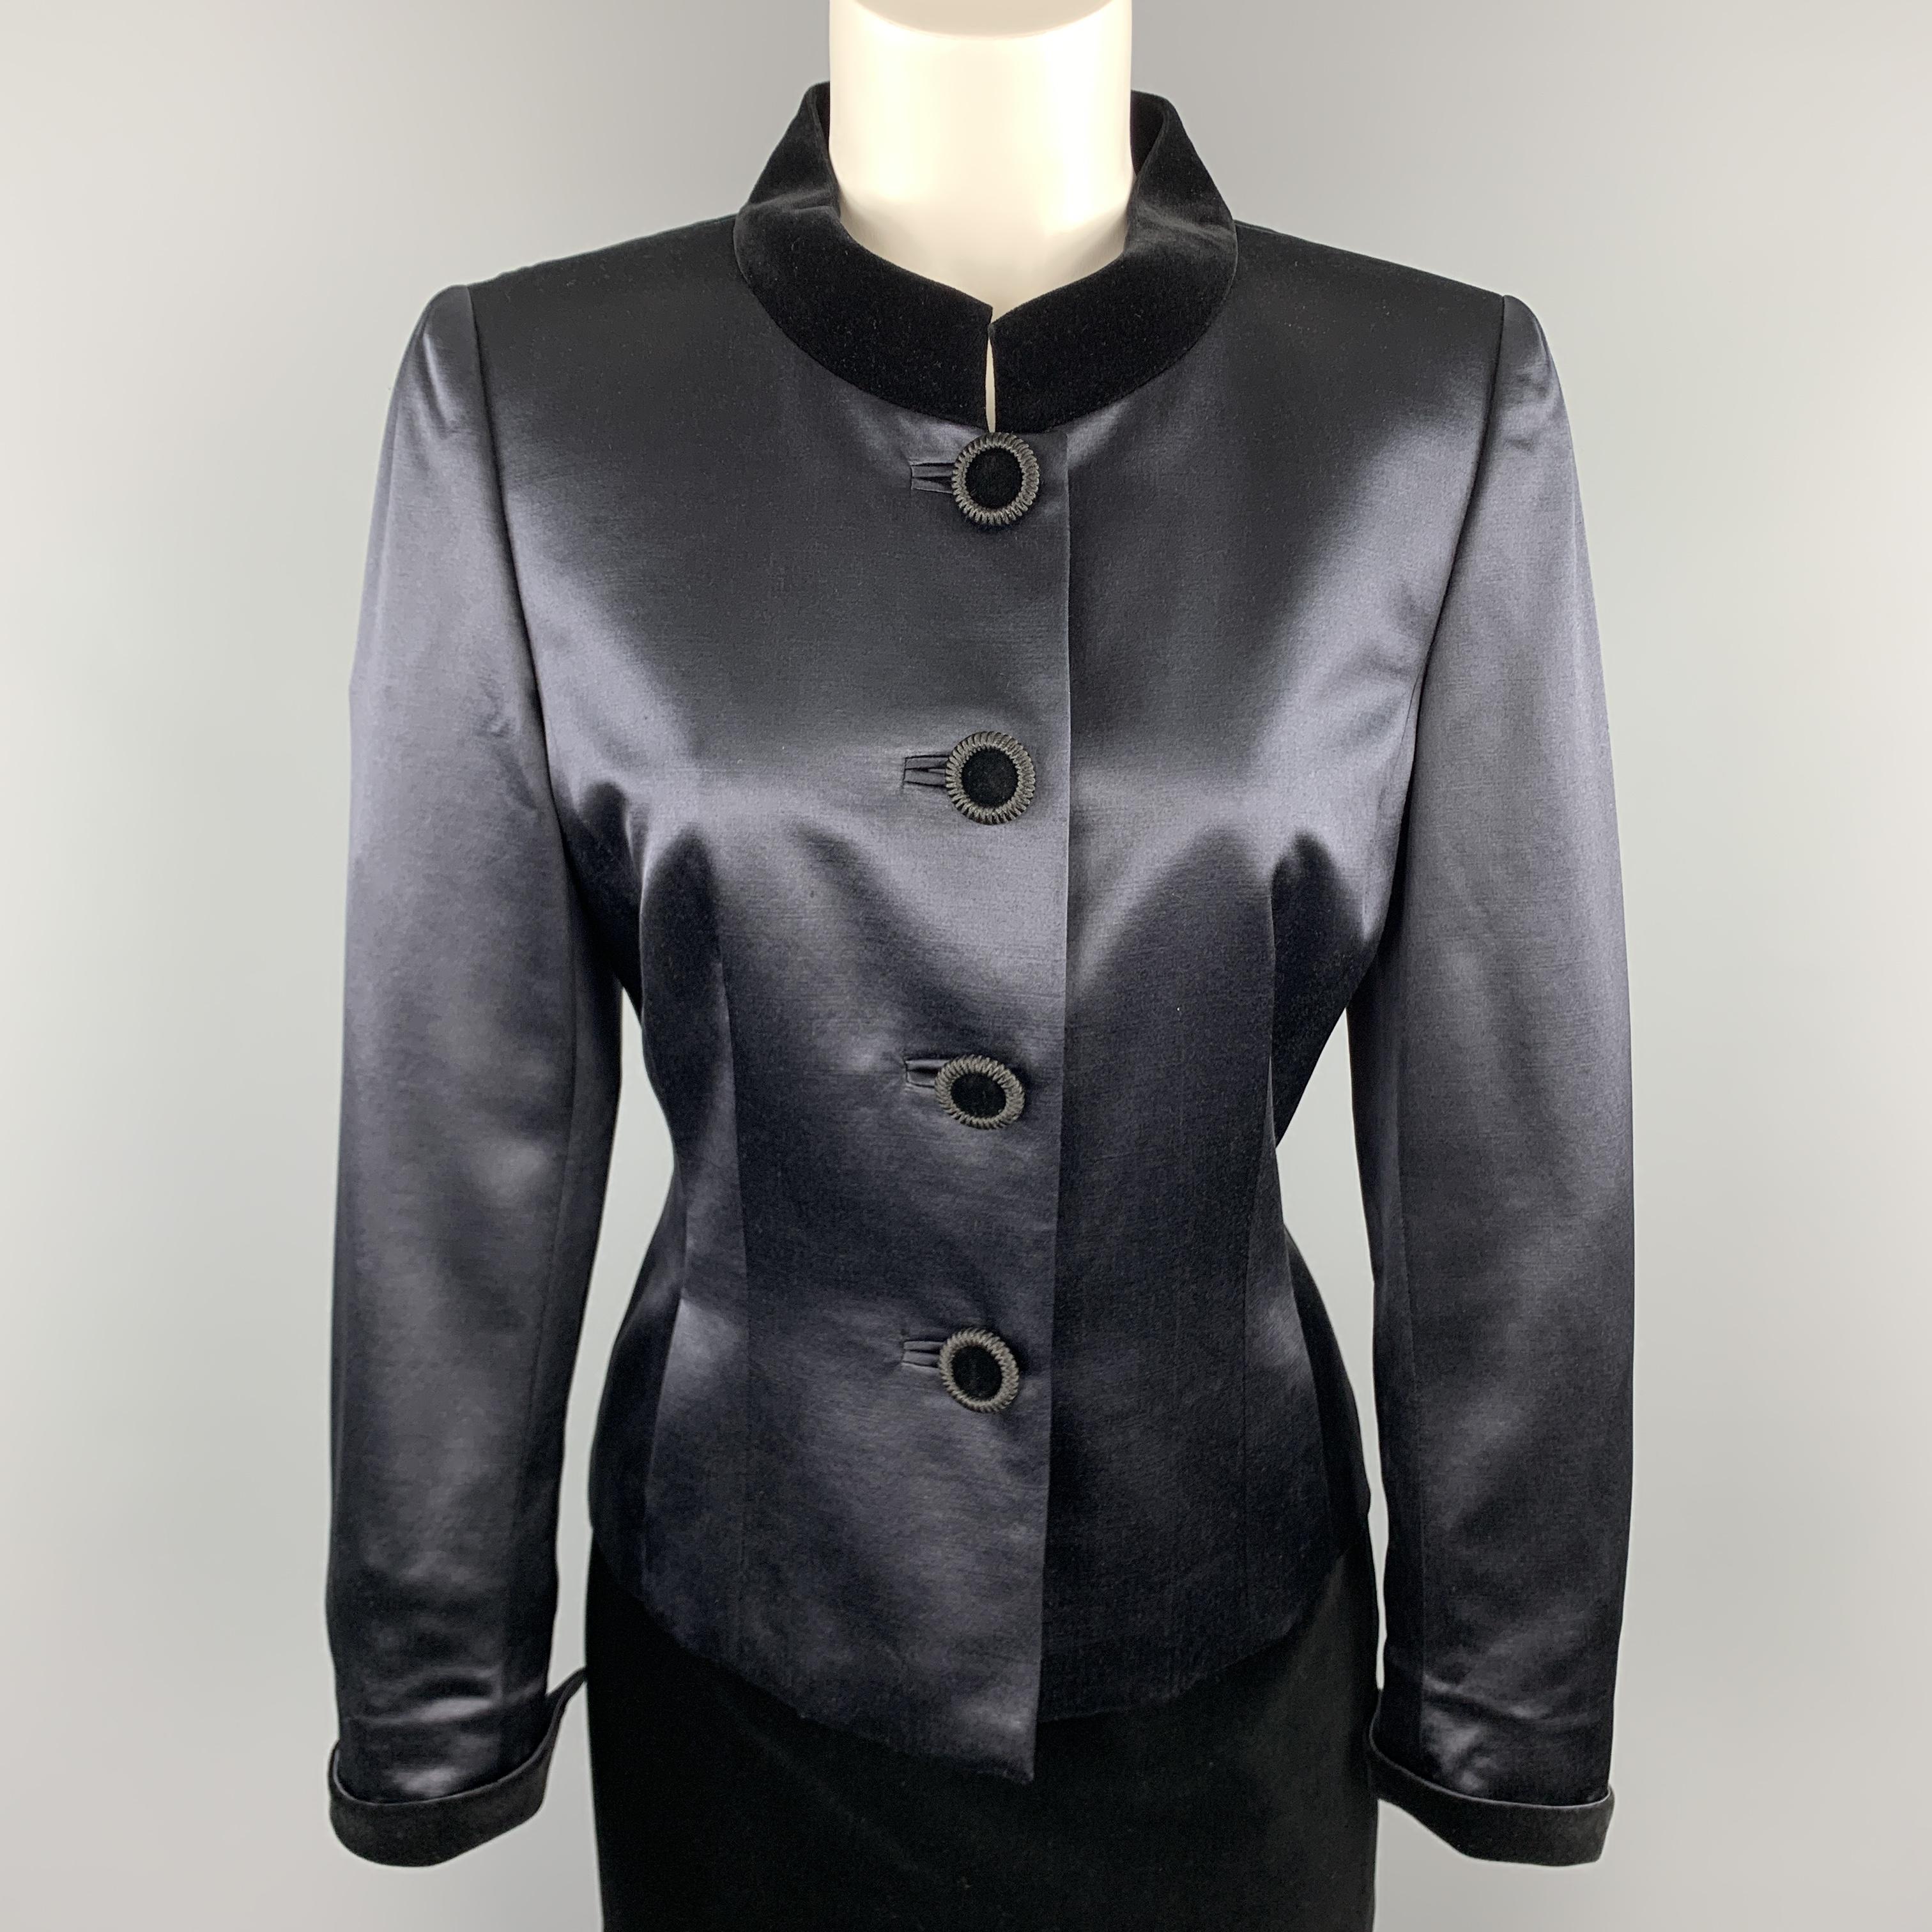 AKRIS skirt suit includes a navy wool sateen single breasted jacket with a stand up black velvet collar and button up front with matching black velvet pencil skirt. 

Very Good Pre-Owned Condition.
Marked: US 8

Measurements:

-Jacket
Shoulder: 15